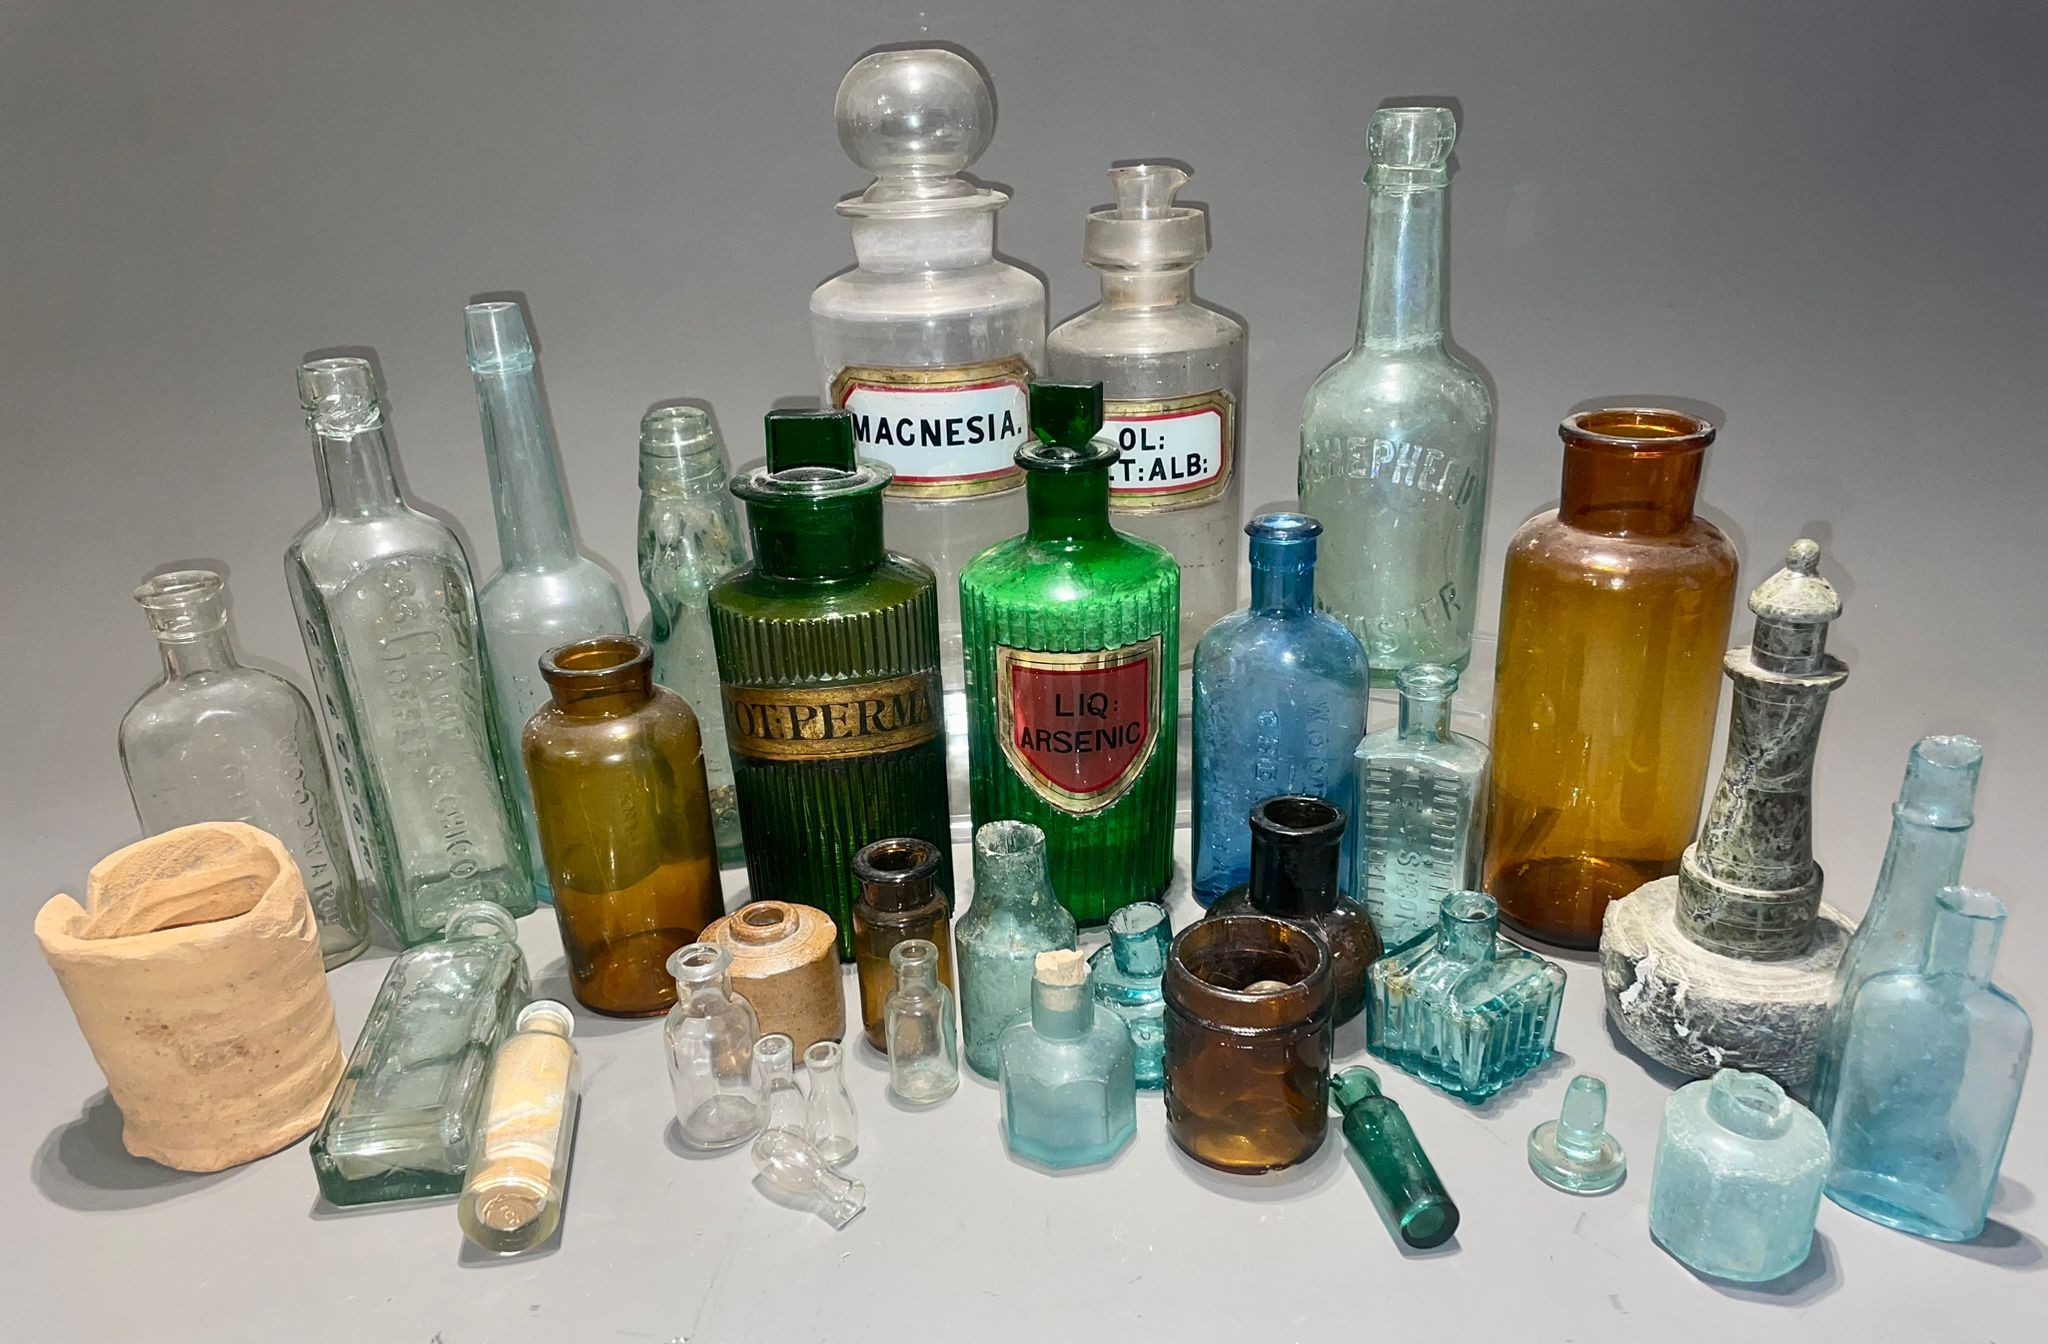 Glassware: early 20th Century bottles including Apothecary (Magnesia, OL:PET: ALB:, LIQ ARSENIC